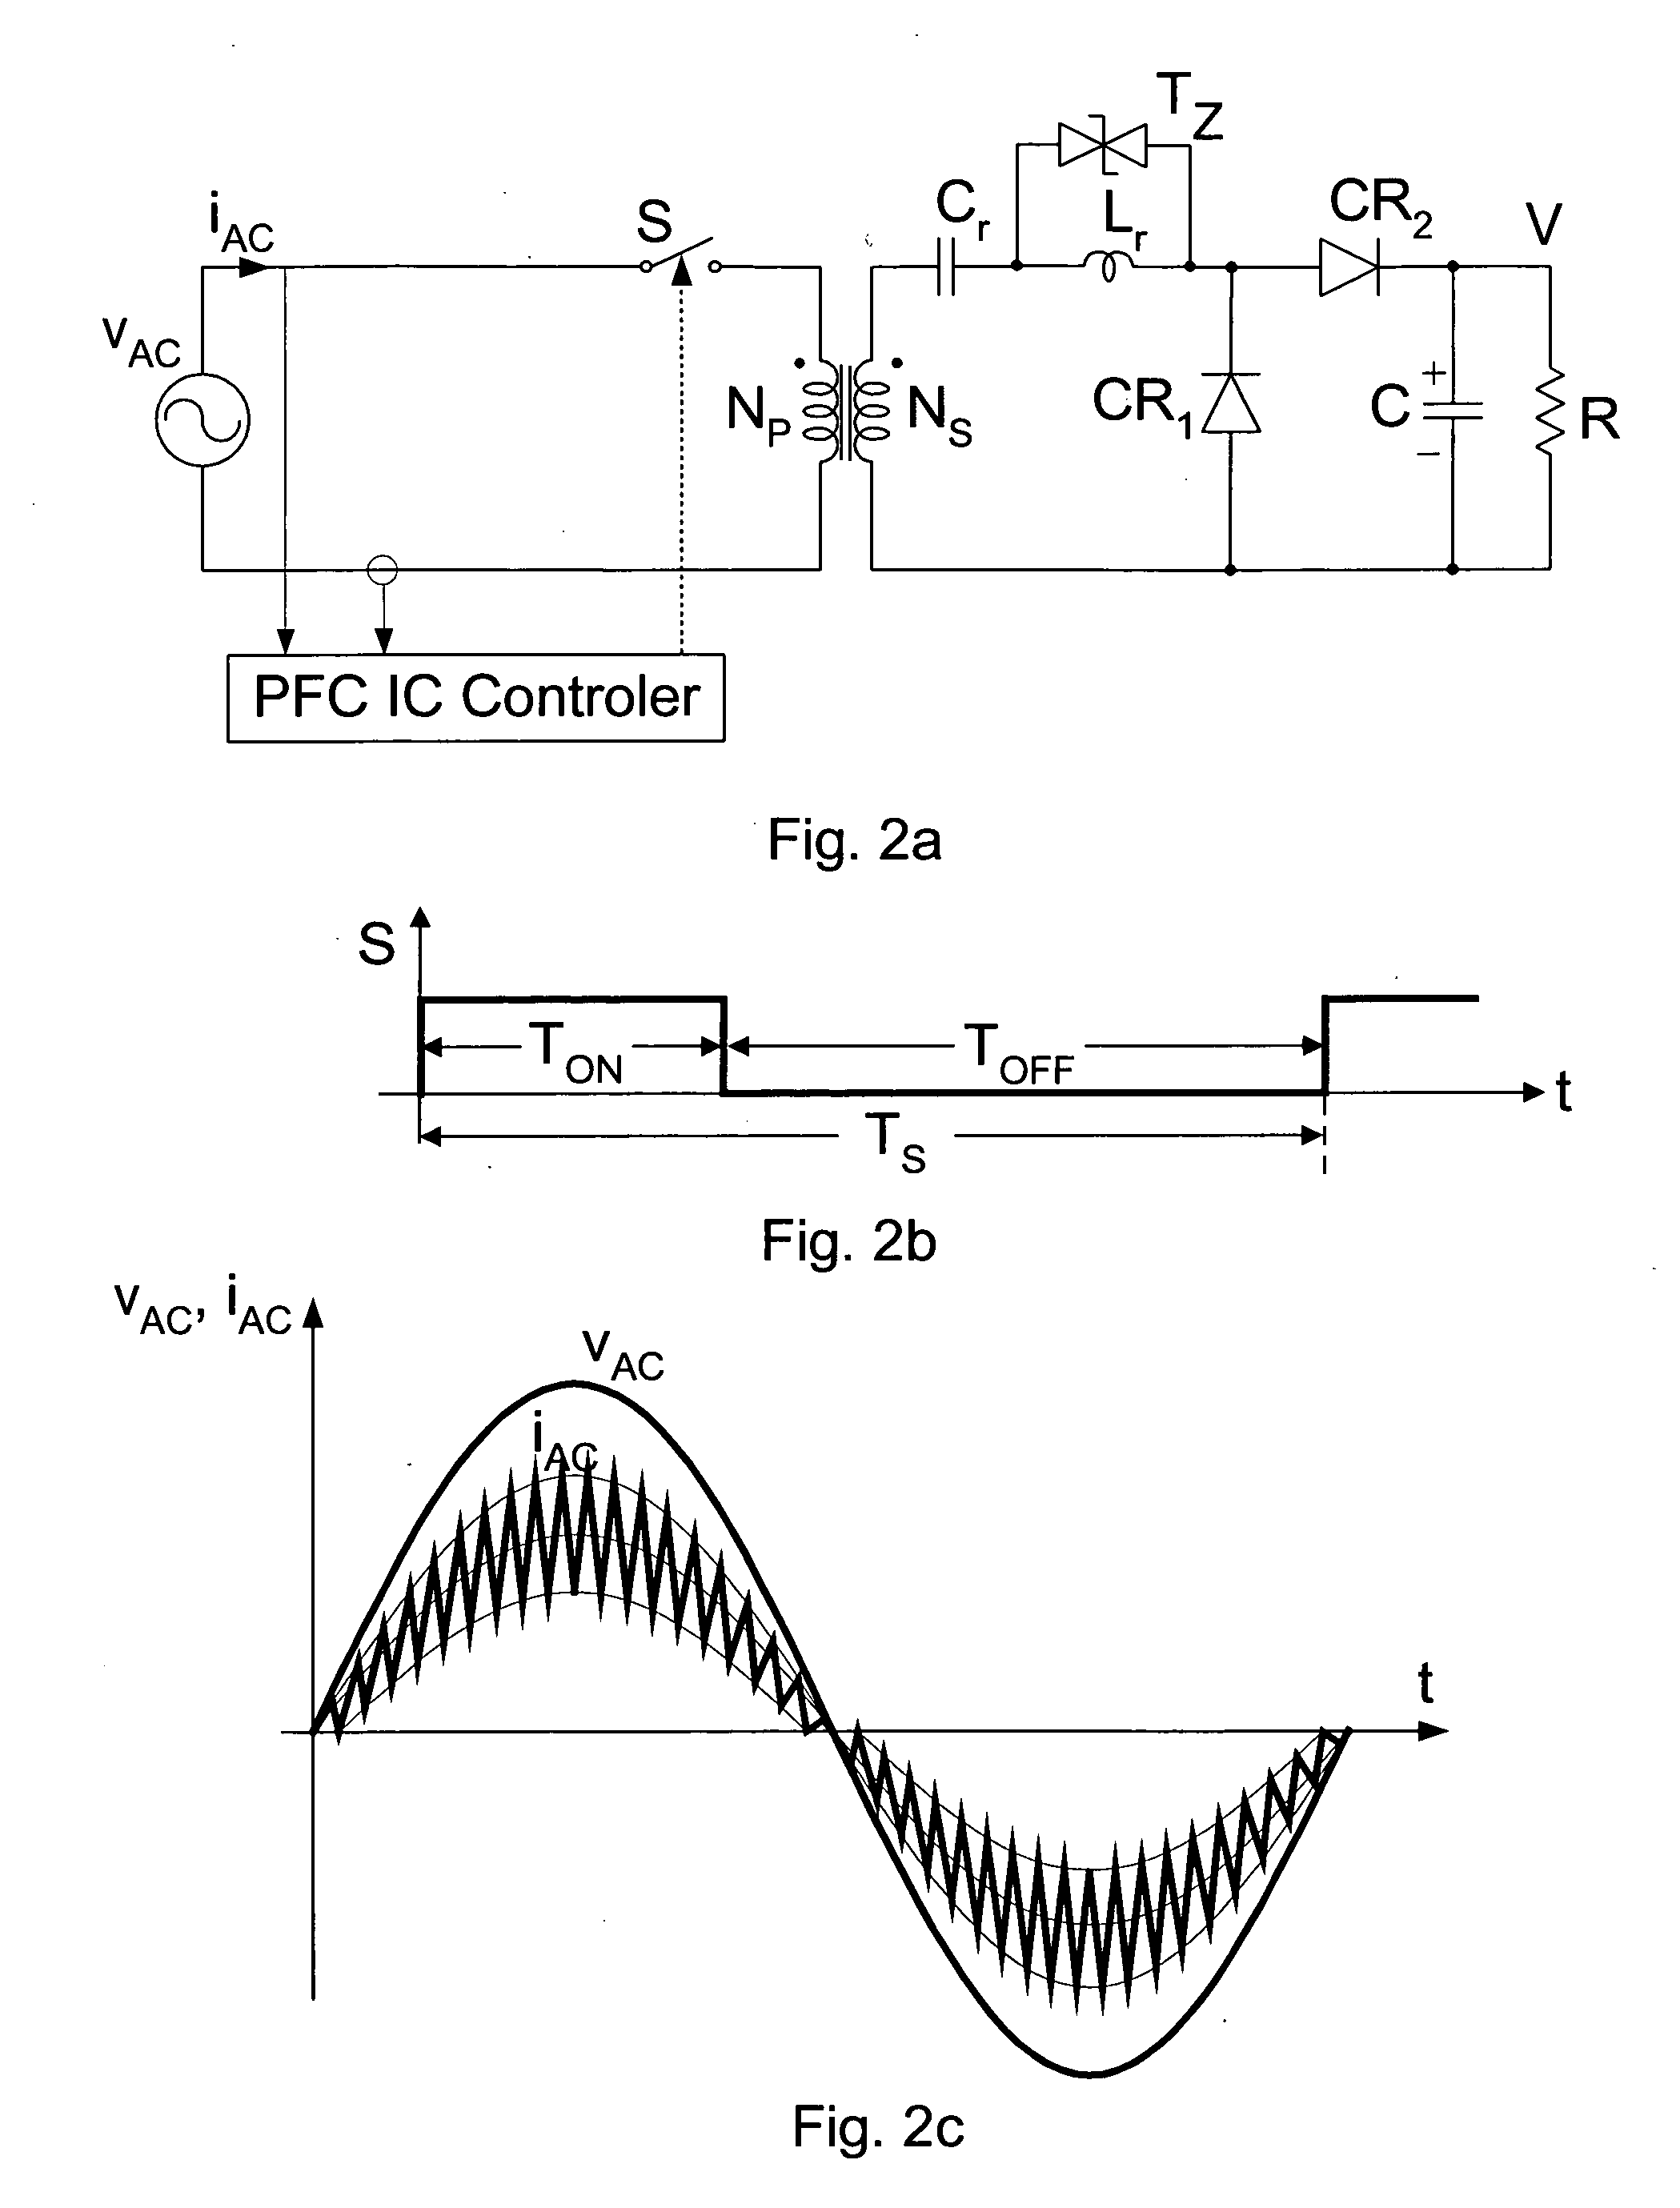 Single-stage AC-to-DC converter with isolation and power factor correction